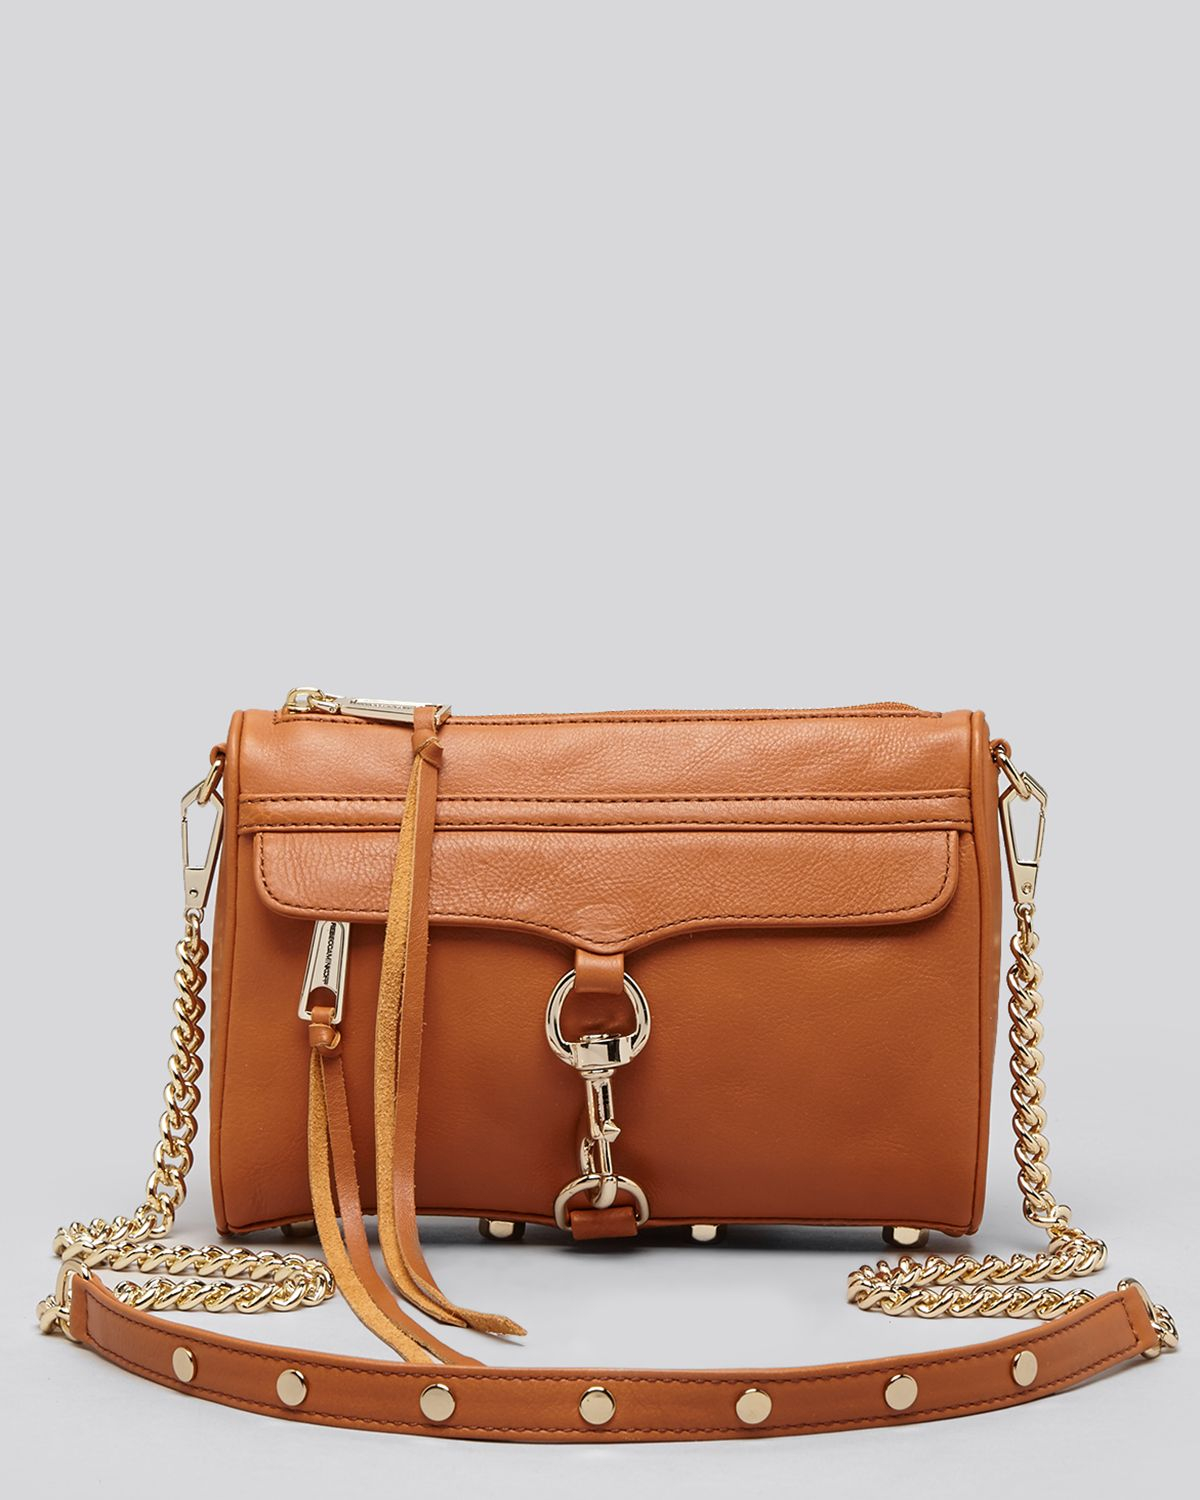 Discover more than 75 rebecca minkoff crossbody bags - in.cdgdbentre